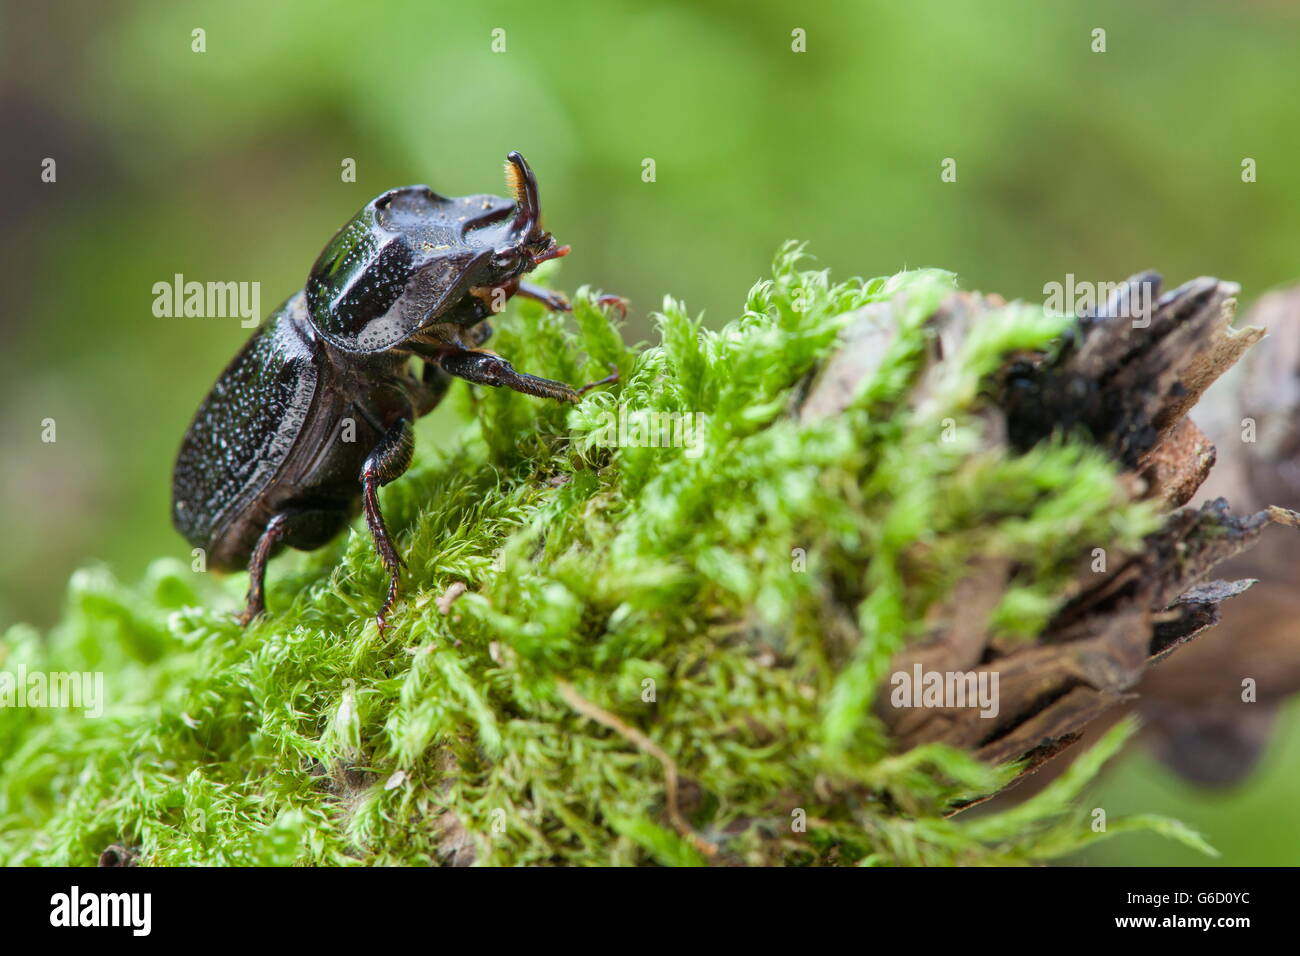 Stag beetle, Germany / (Sinodendron cylindricum) Stock Photo